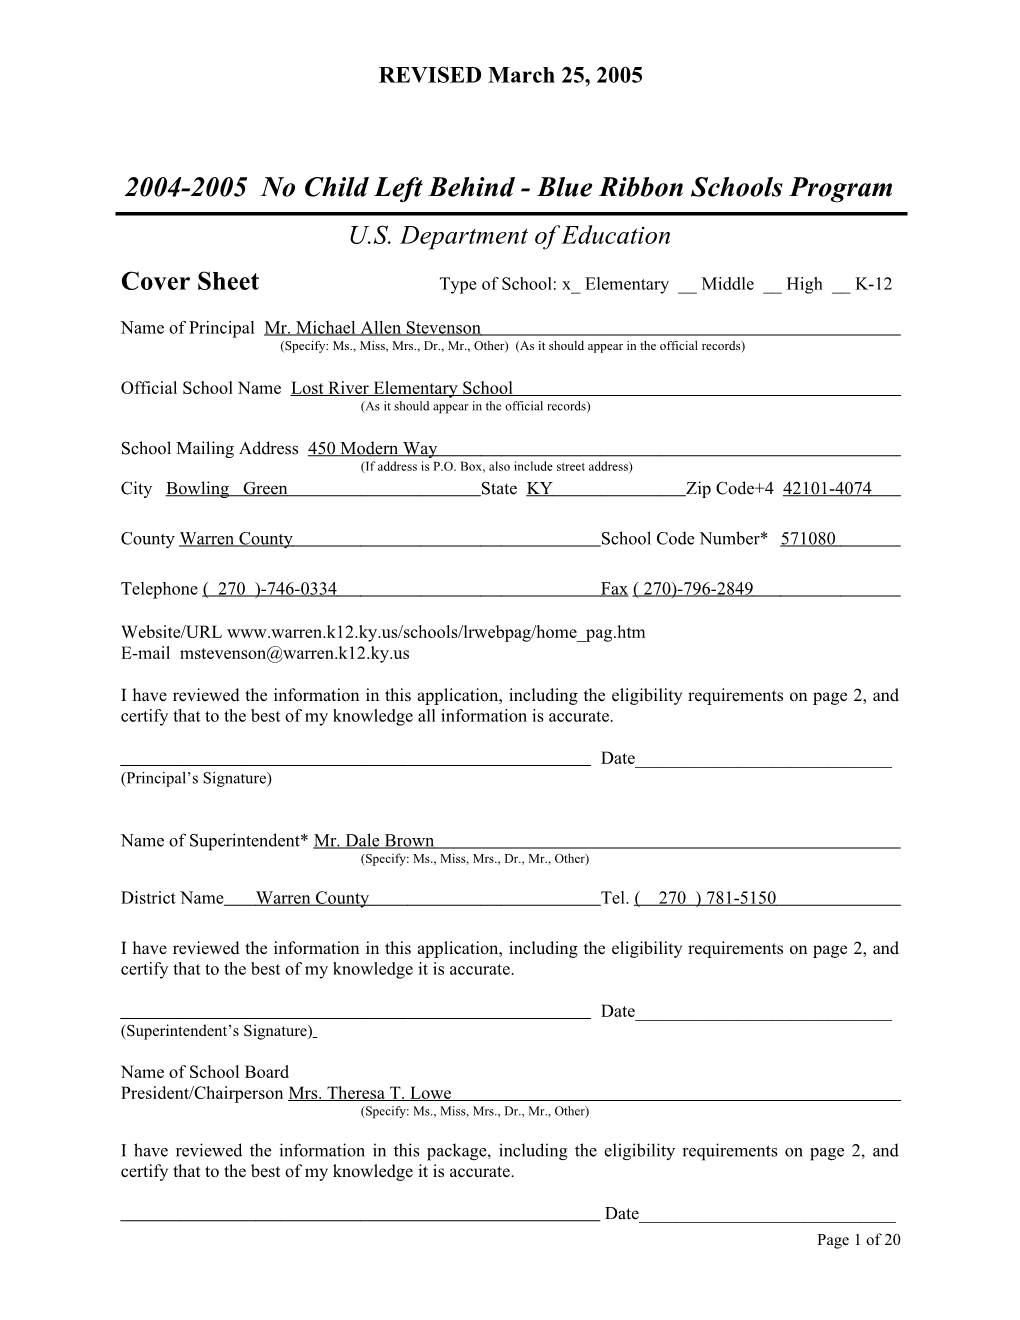 Lost River Elementary School Application: 2004-2005, No Child Left Behind - Blue Ribbon